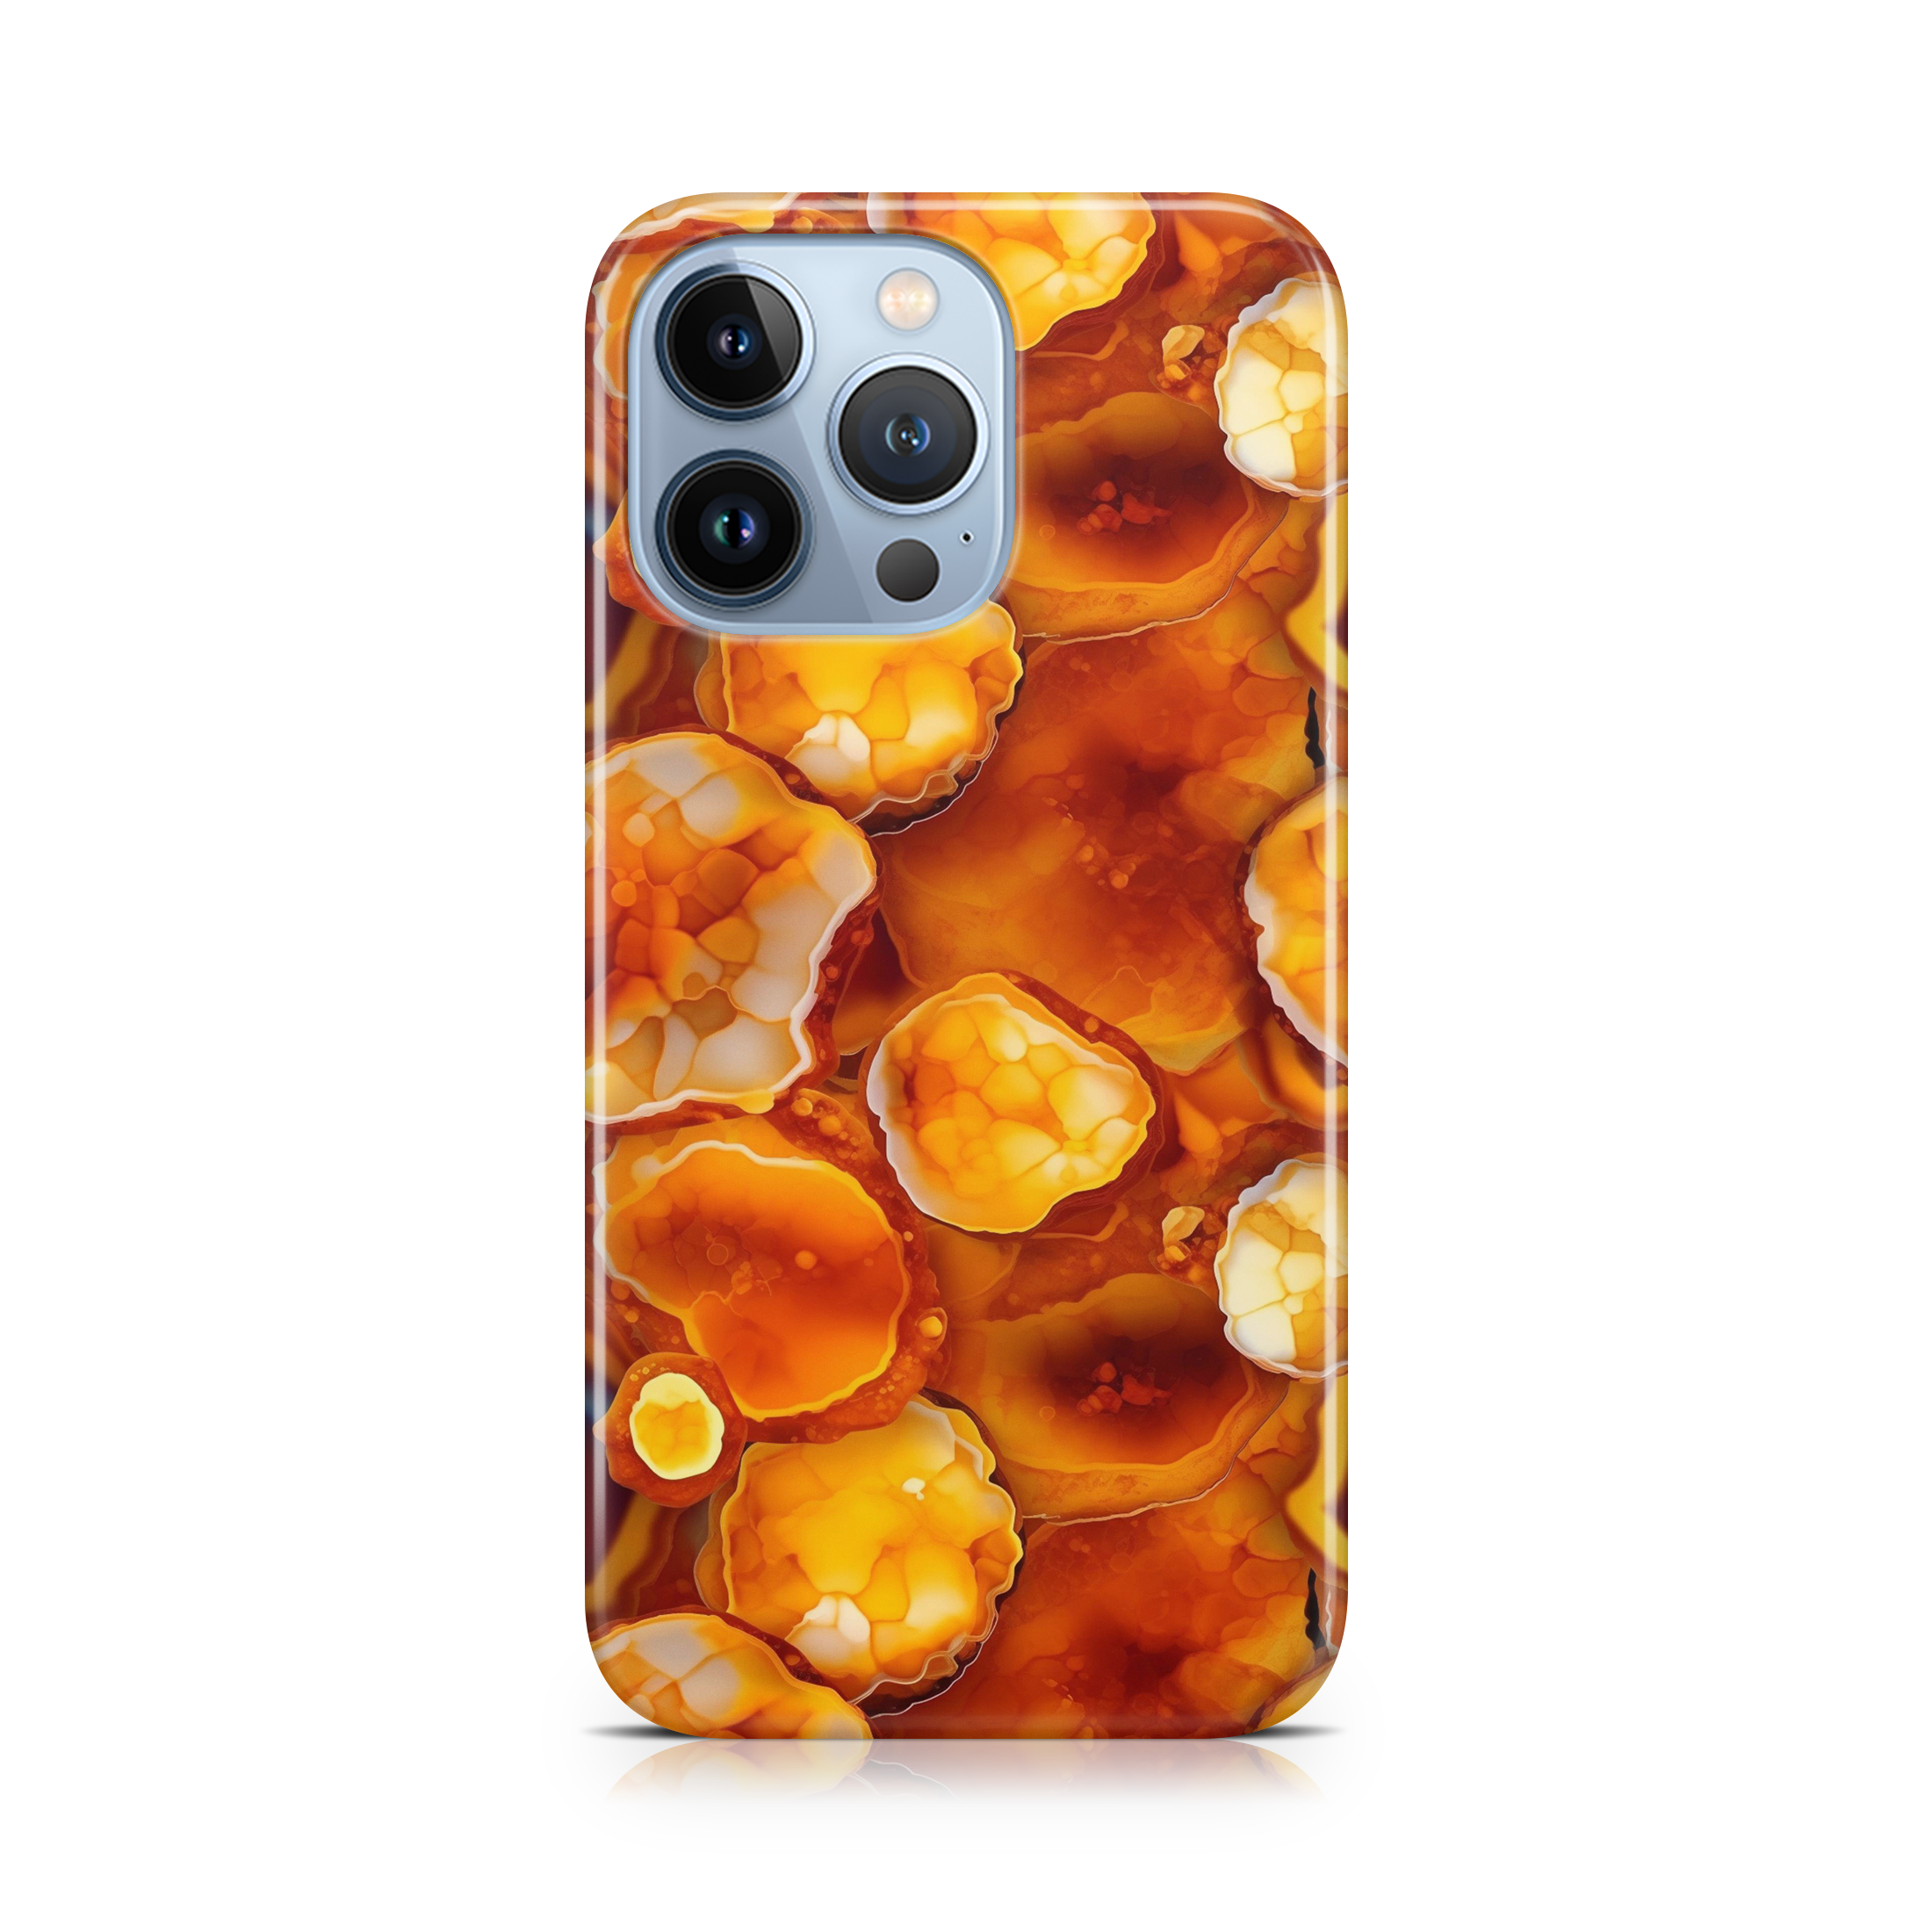 Orange Geode - iPhone phone case designs by CaseSwagger